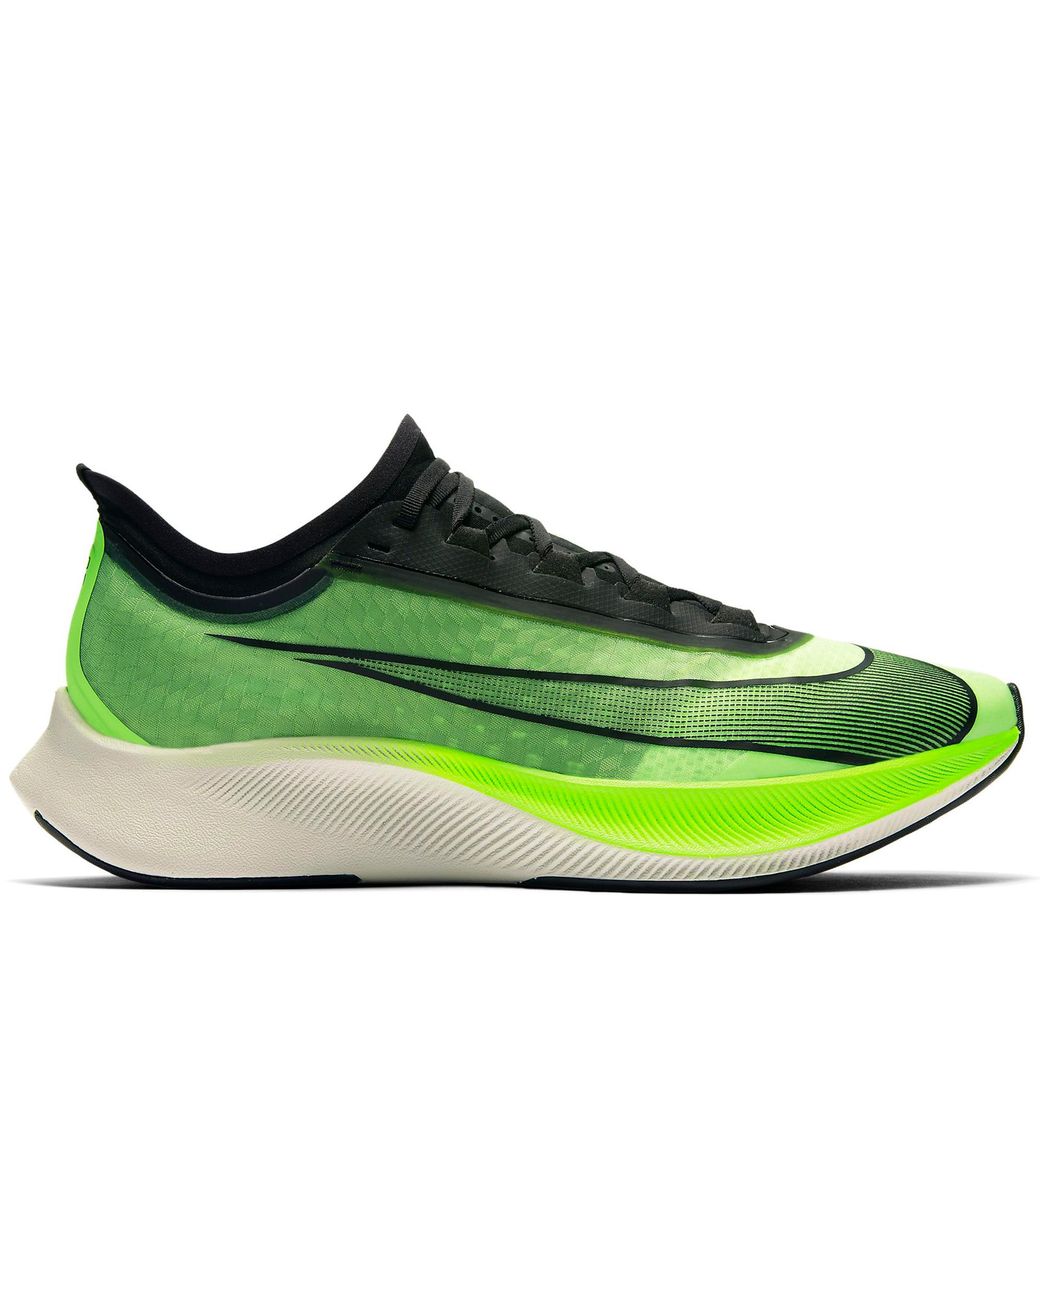 Nike Zoom Fly 3 Running Shoe in Electric Green (Green) for Men - Save ...